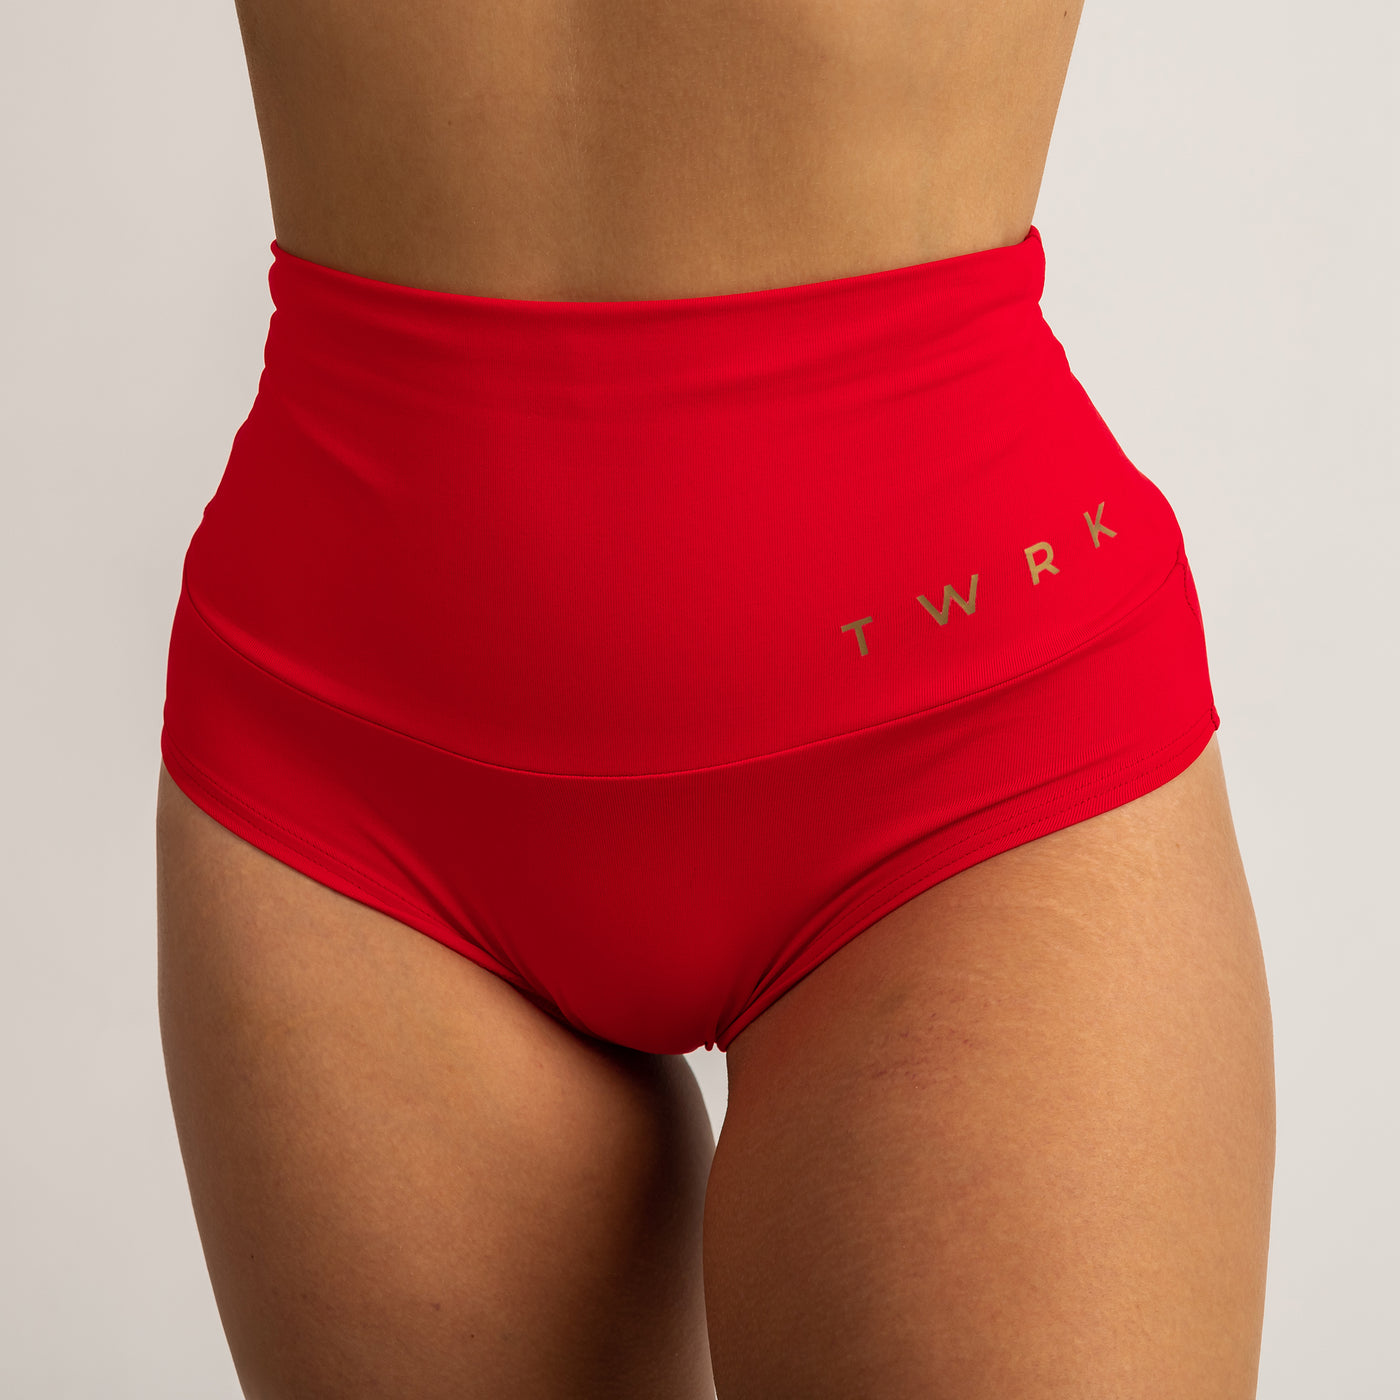 TWRKWEAR The Perfect Twerk Shorts™ 2.0 – Exclusive Collection: FIERCE RED